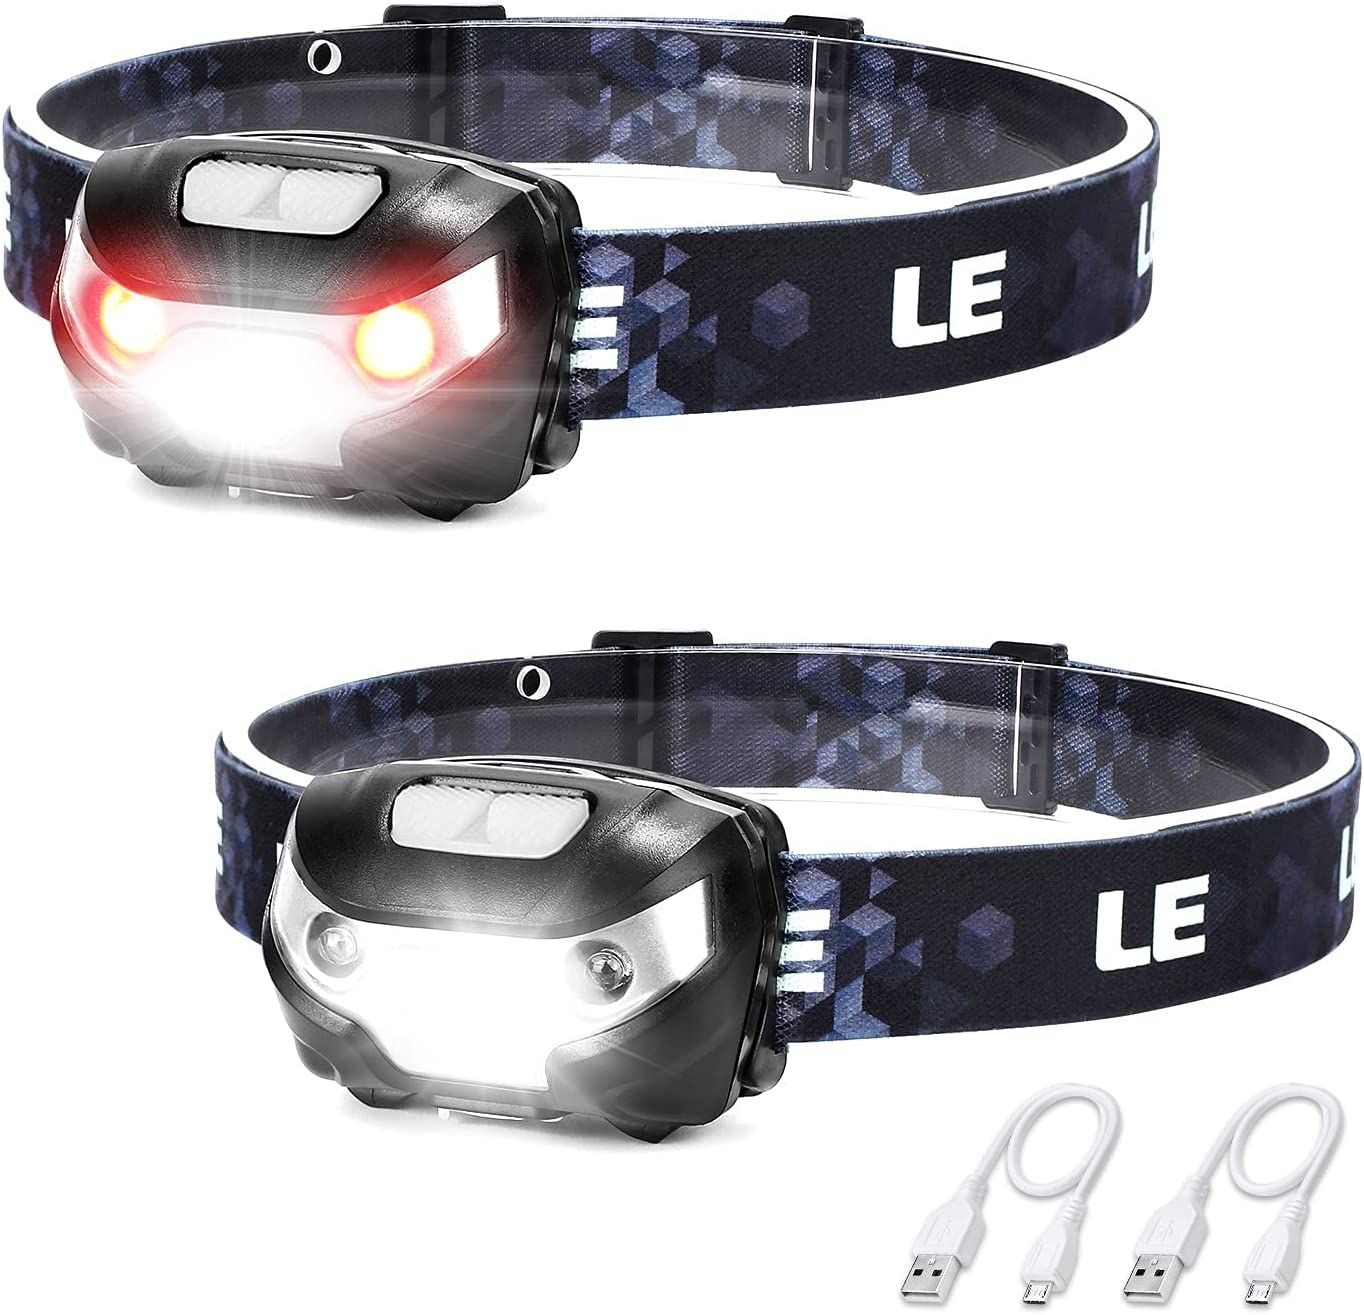 ‎Lighting EVER Rechargeable LED Headlamp